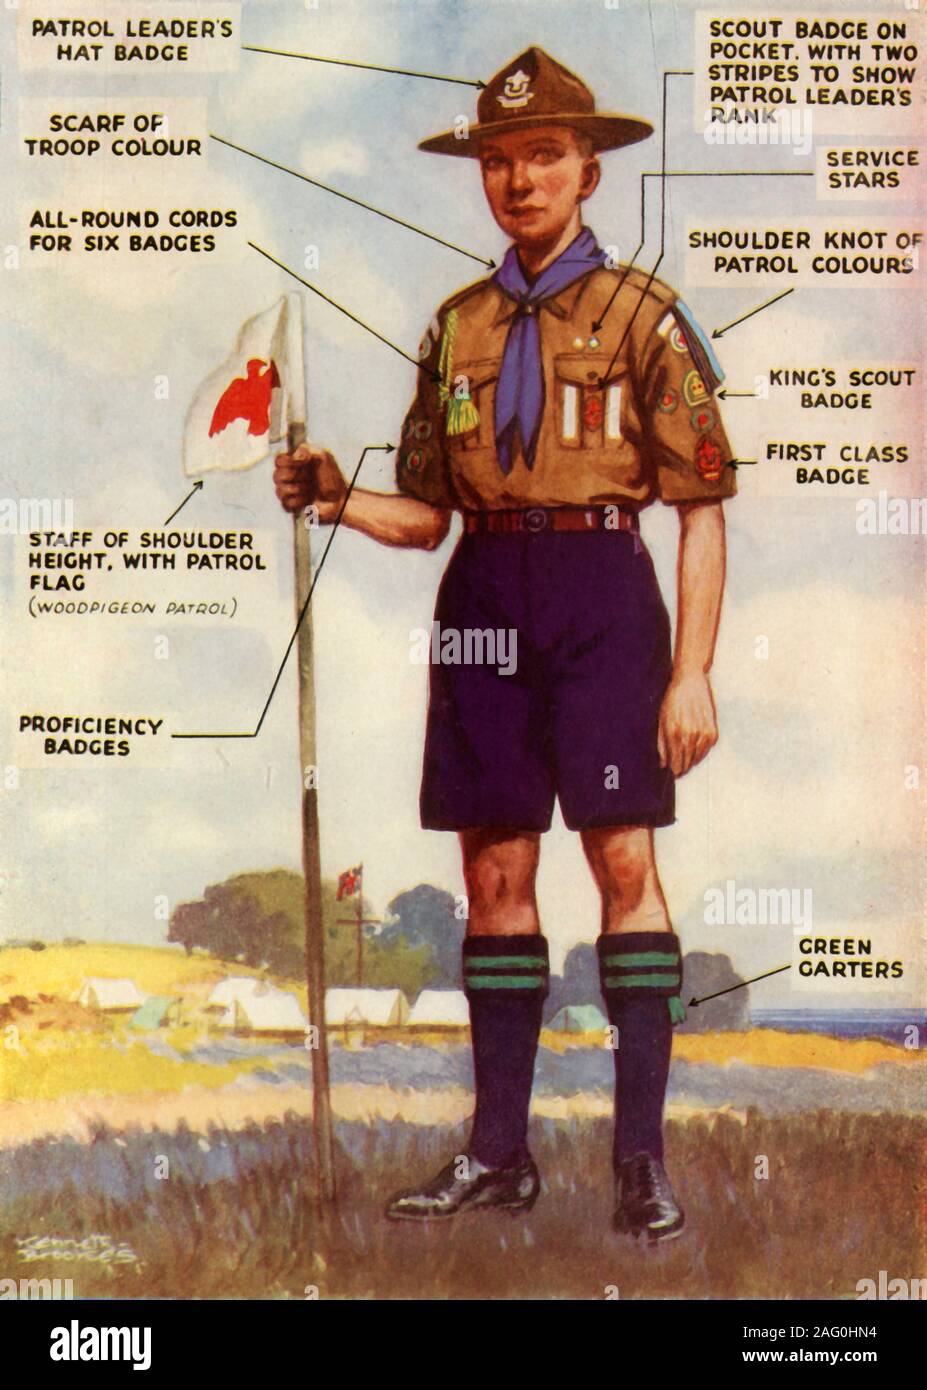 What is a class b uniform for boy scouts?